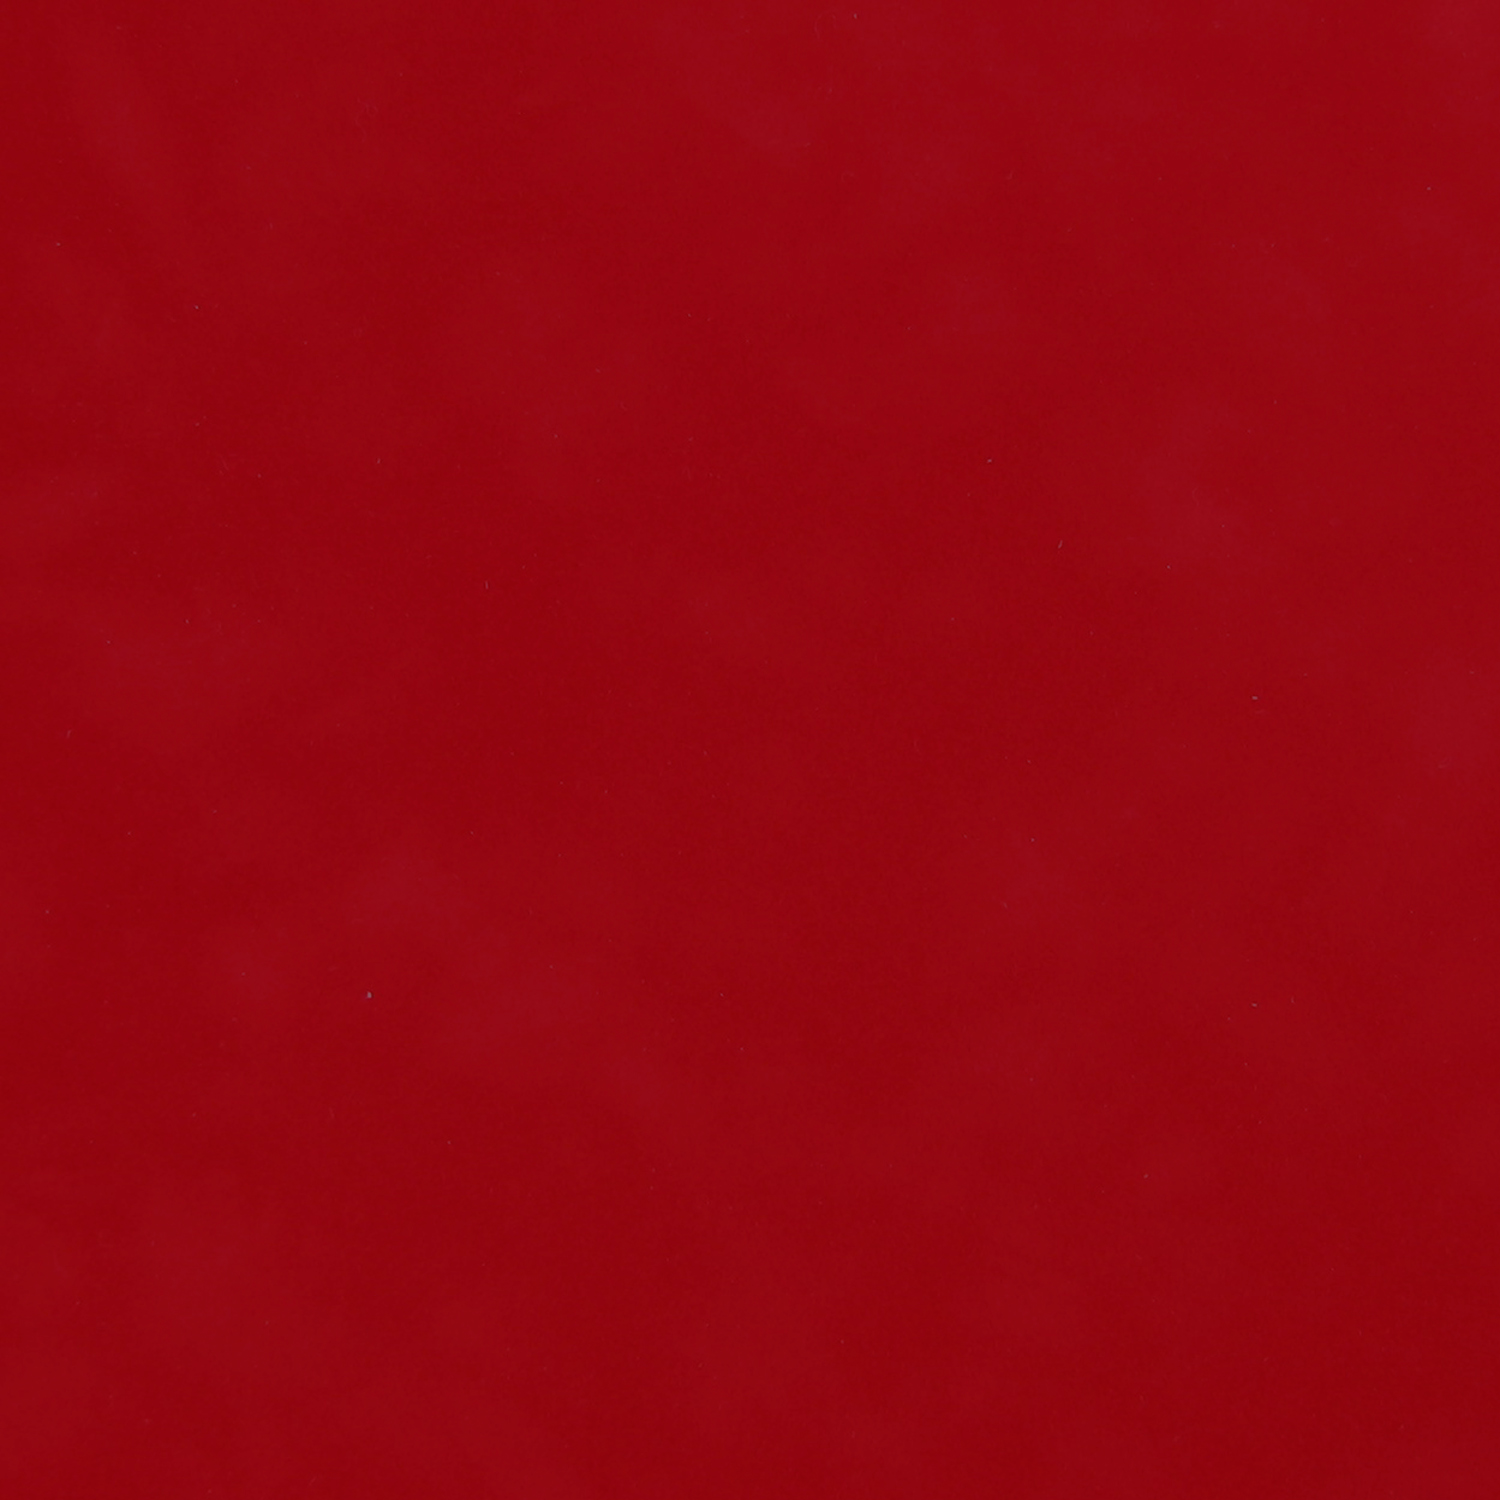 Solid Red Background Tops Wallpaper Gallery